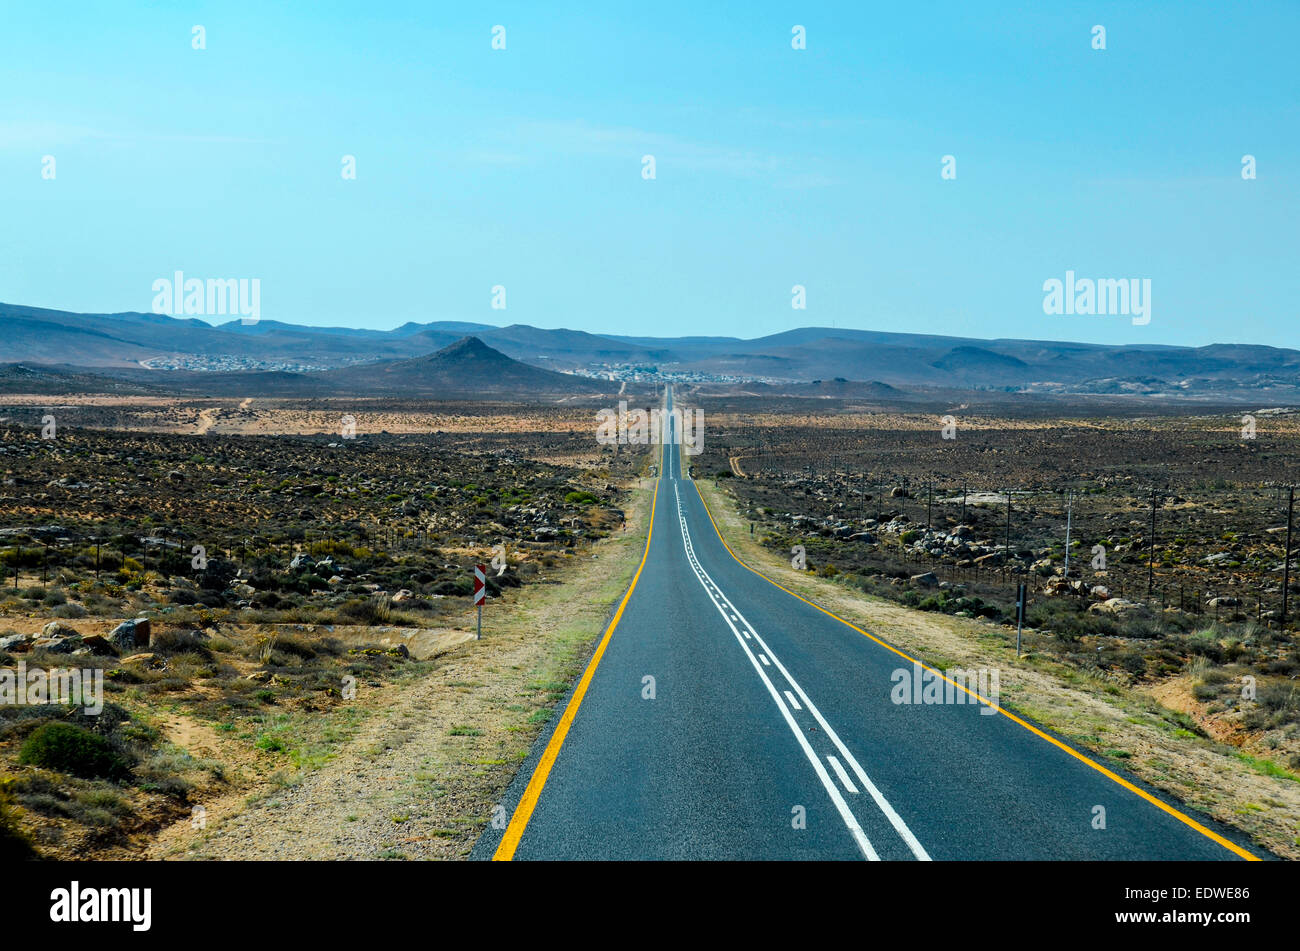 An empty road in the Namibian desert Stock Photo